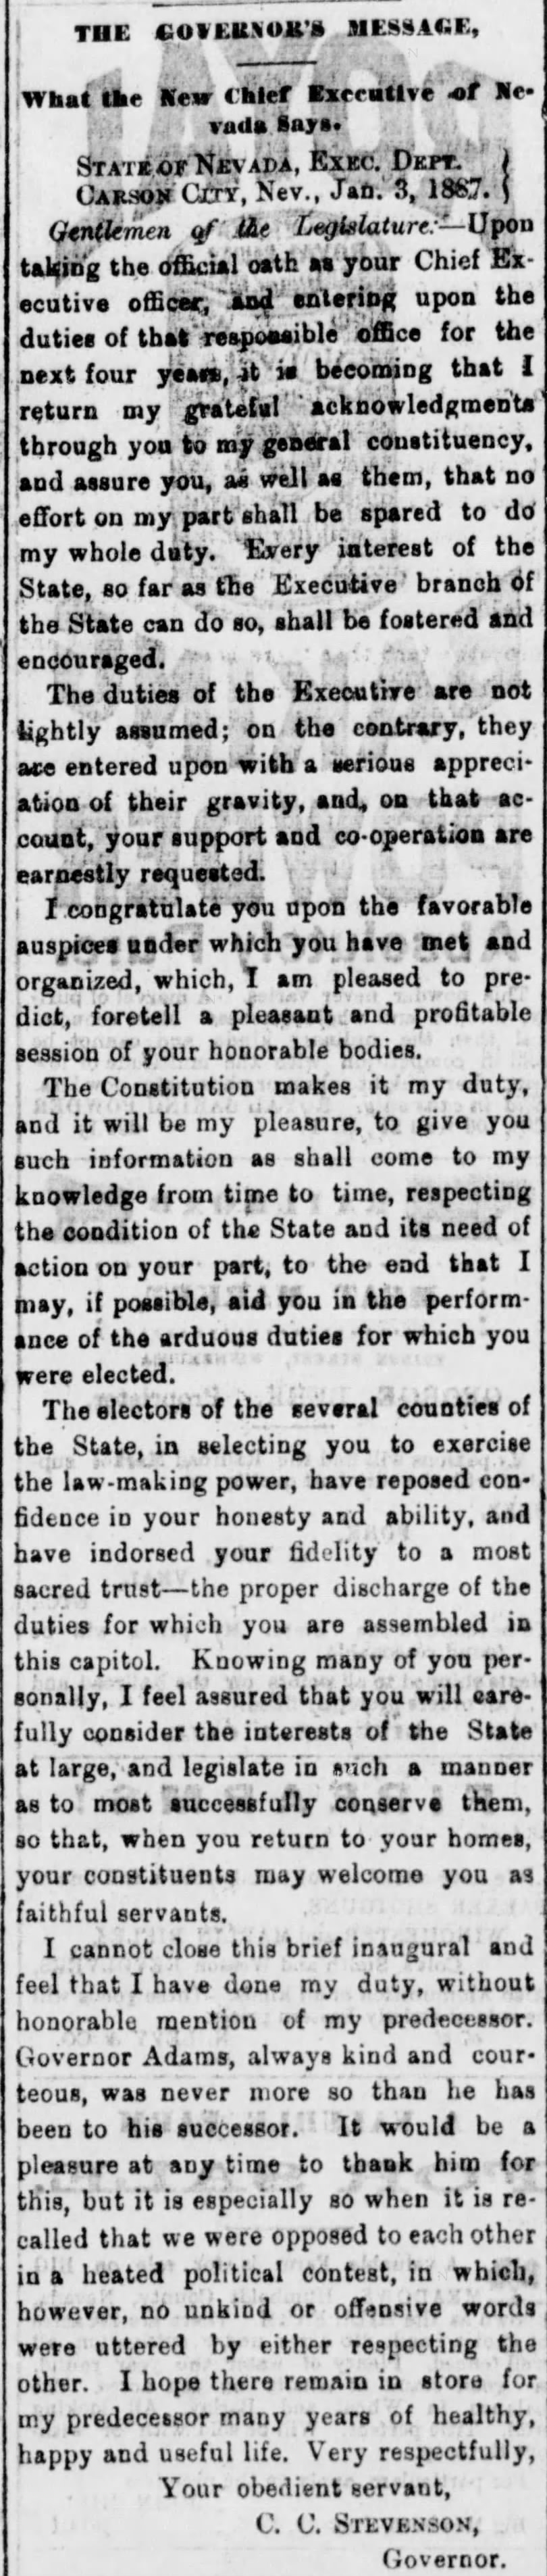 Stevenson's inaugural message, dated January 3